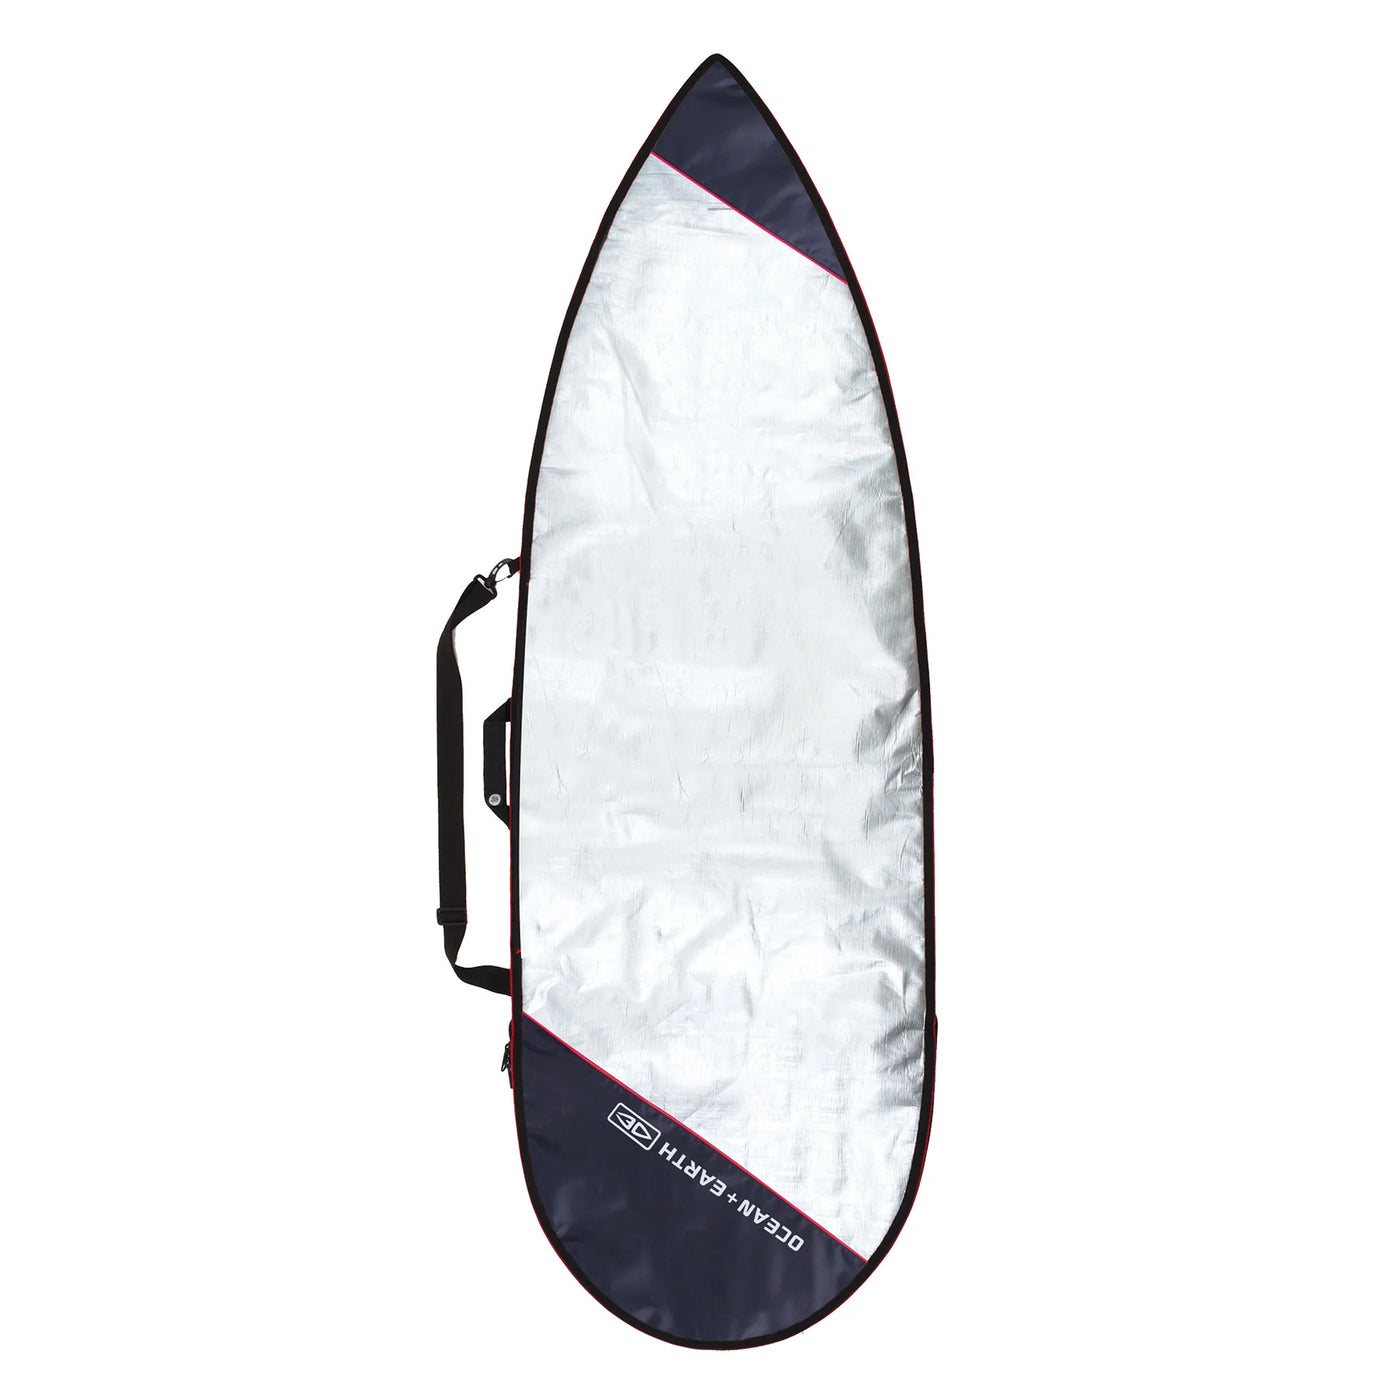 BARRY SHORTBOARD COVER